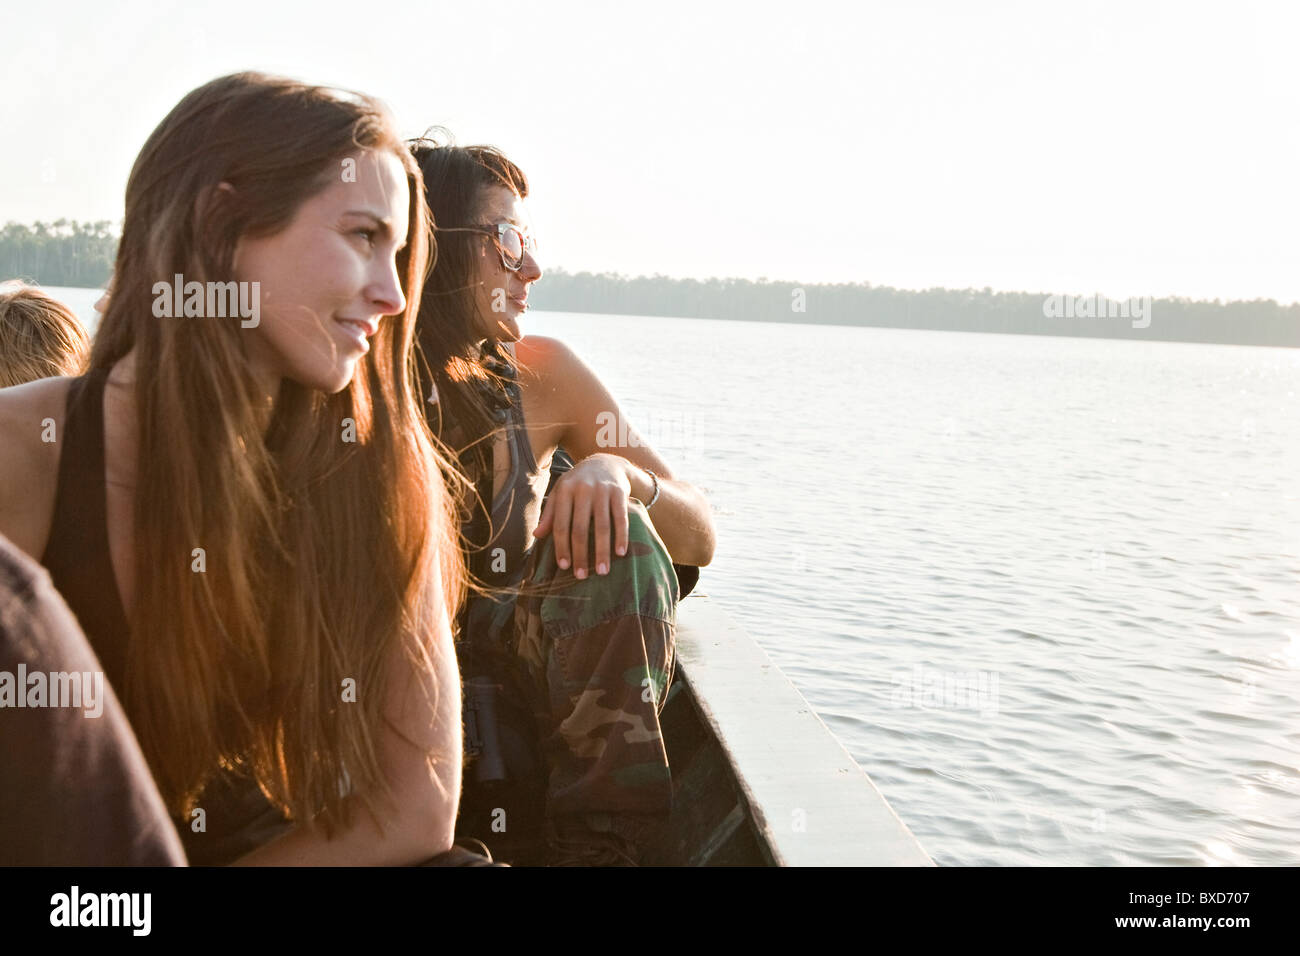 Two young women look into the sunset over Lake Sandoval, in the amazon rainforest. Stock Photo